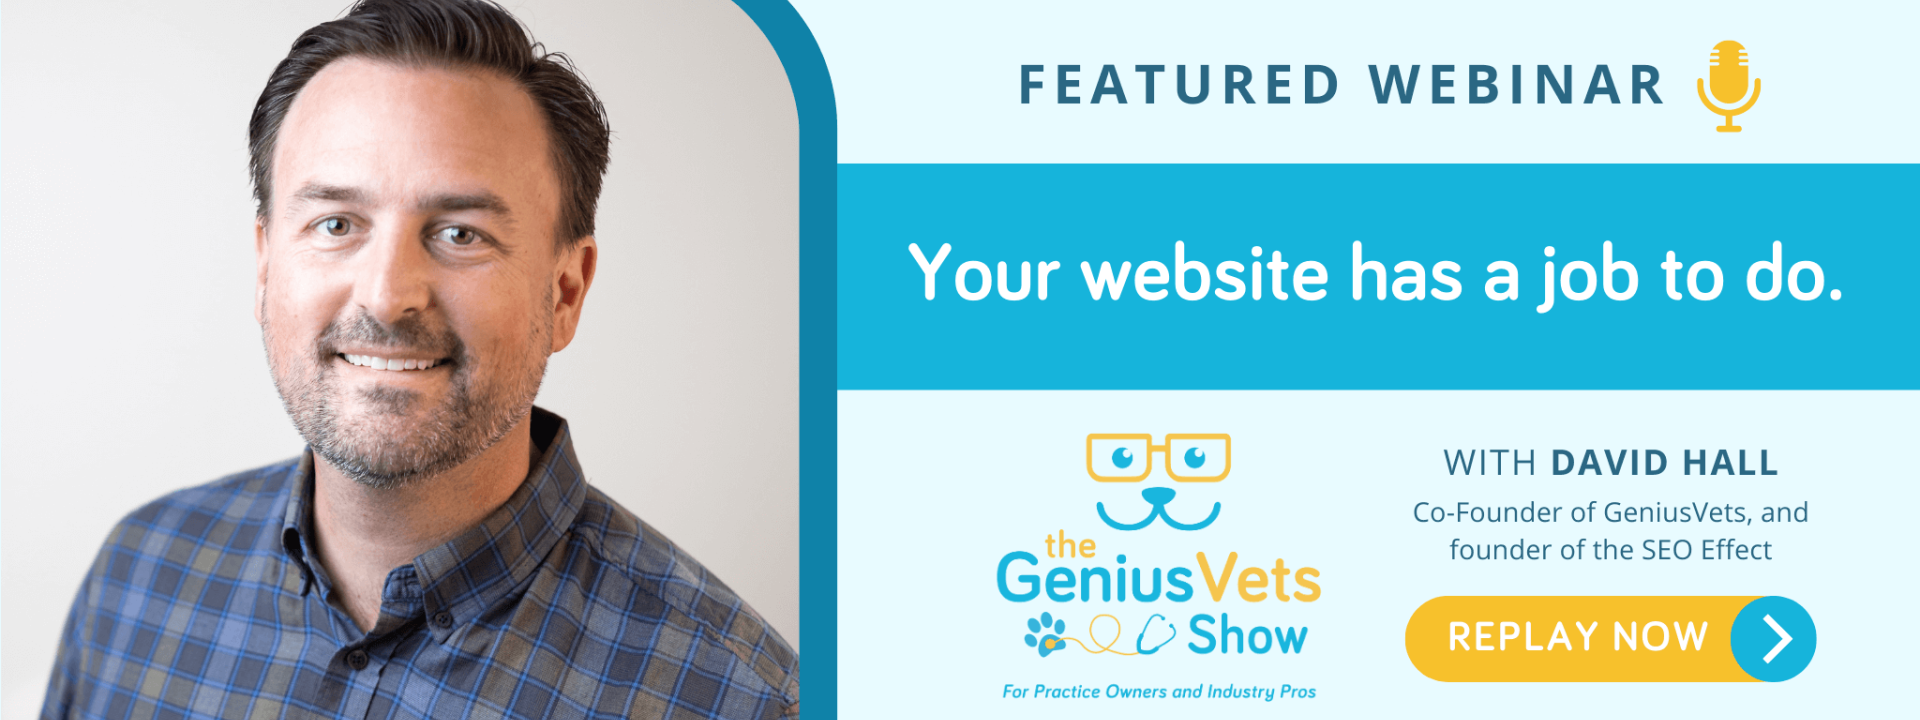 The GeniusVets Show with David Hall - Your Website has a Job to do